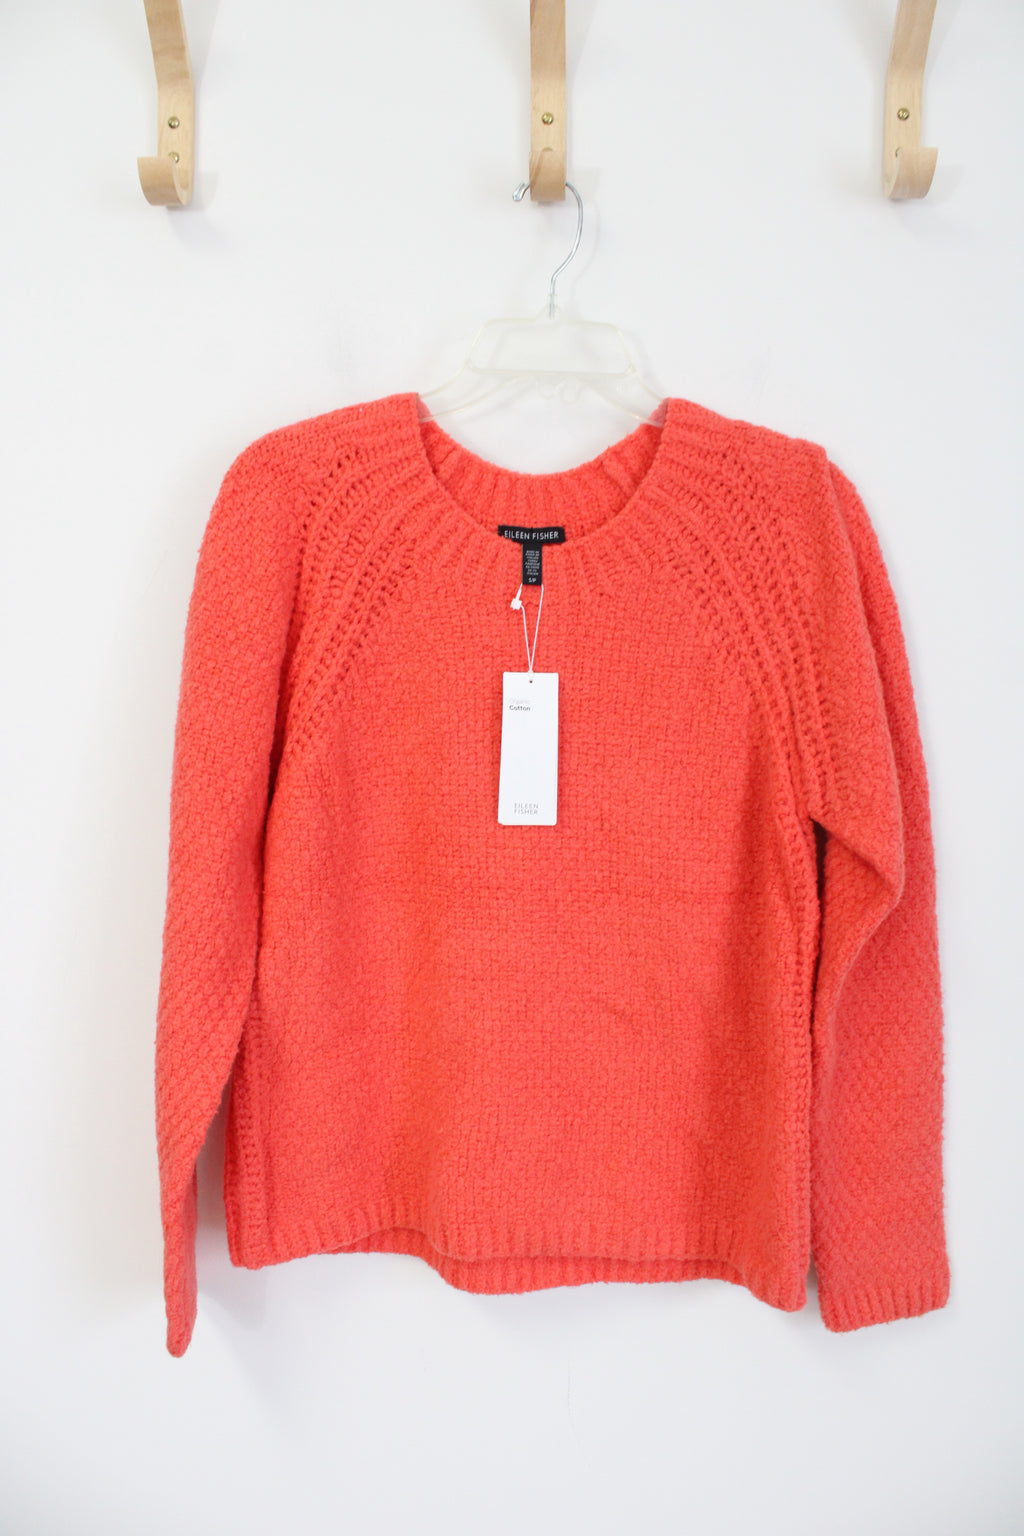 NEW Eileen Fisher Coral Orange Knit Sweater | S